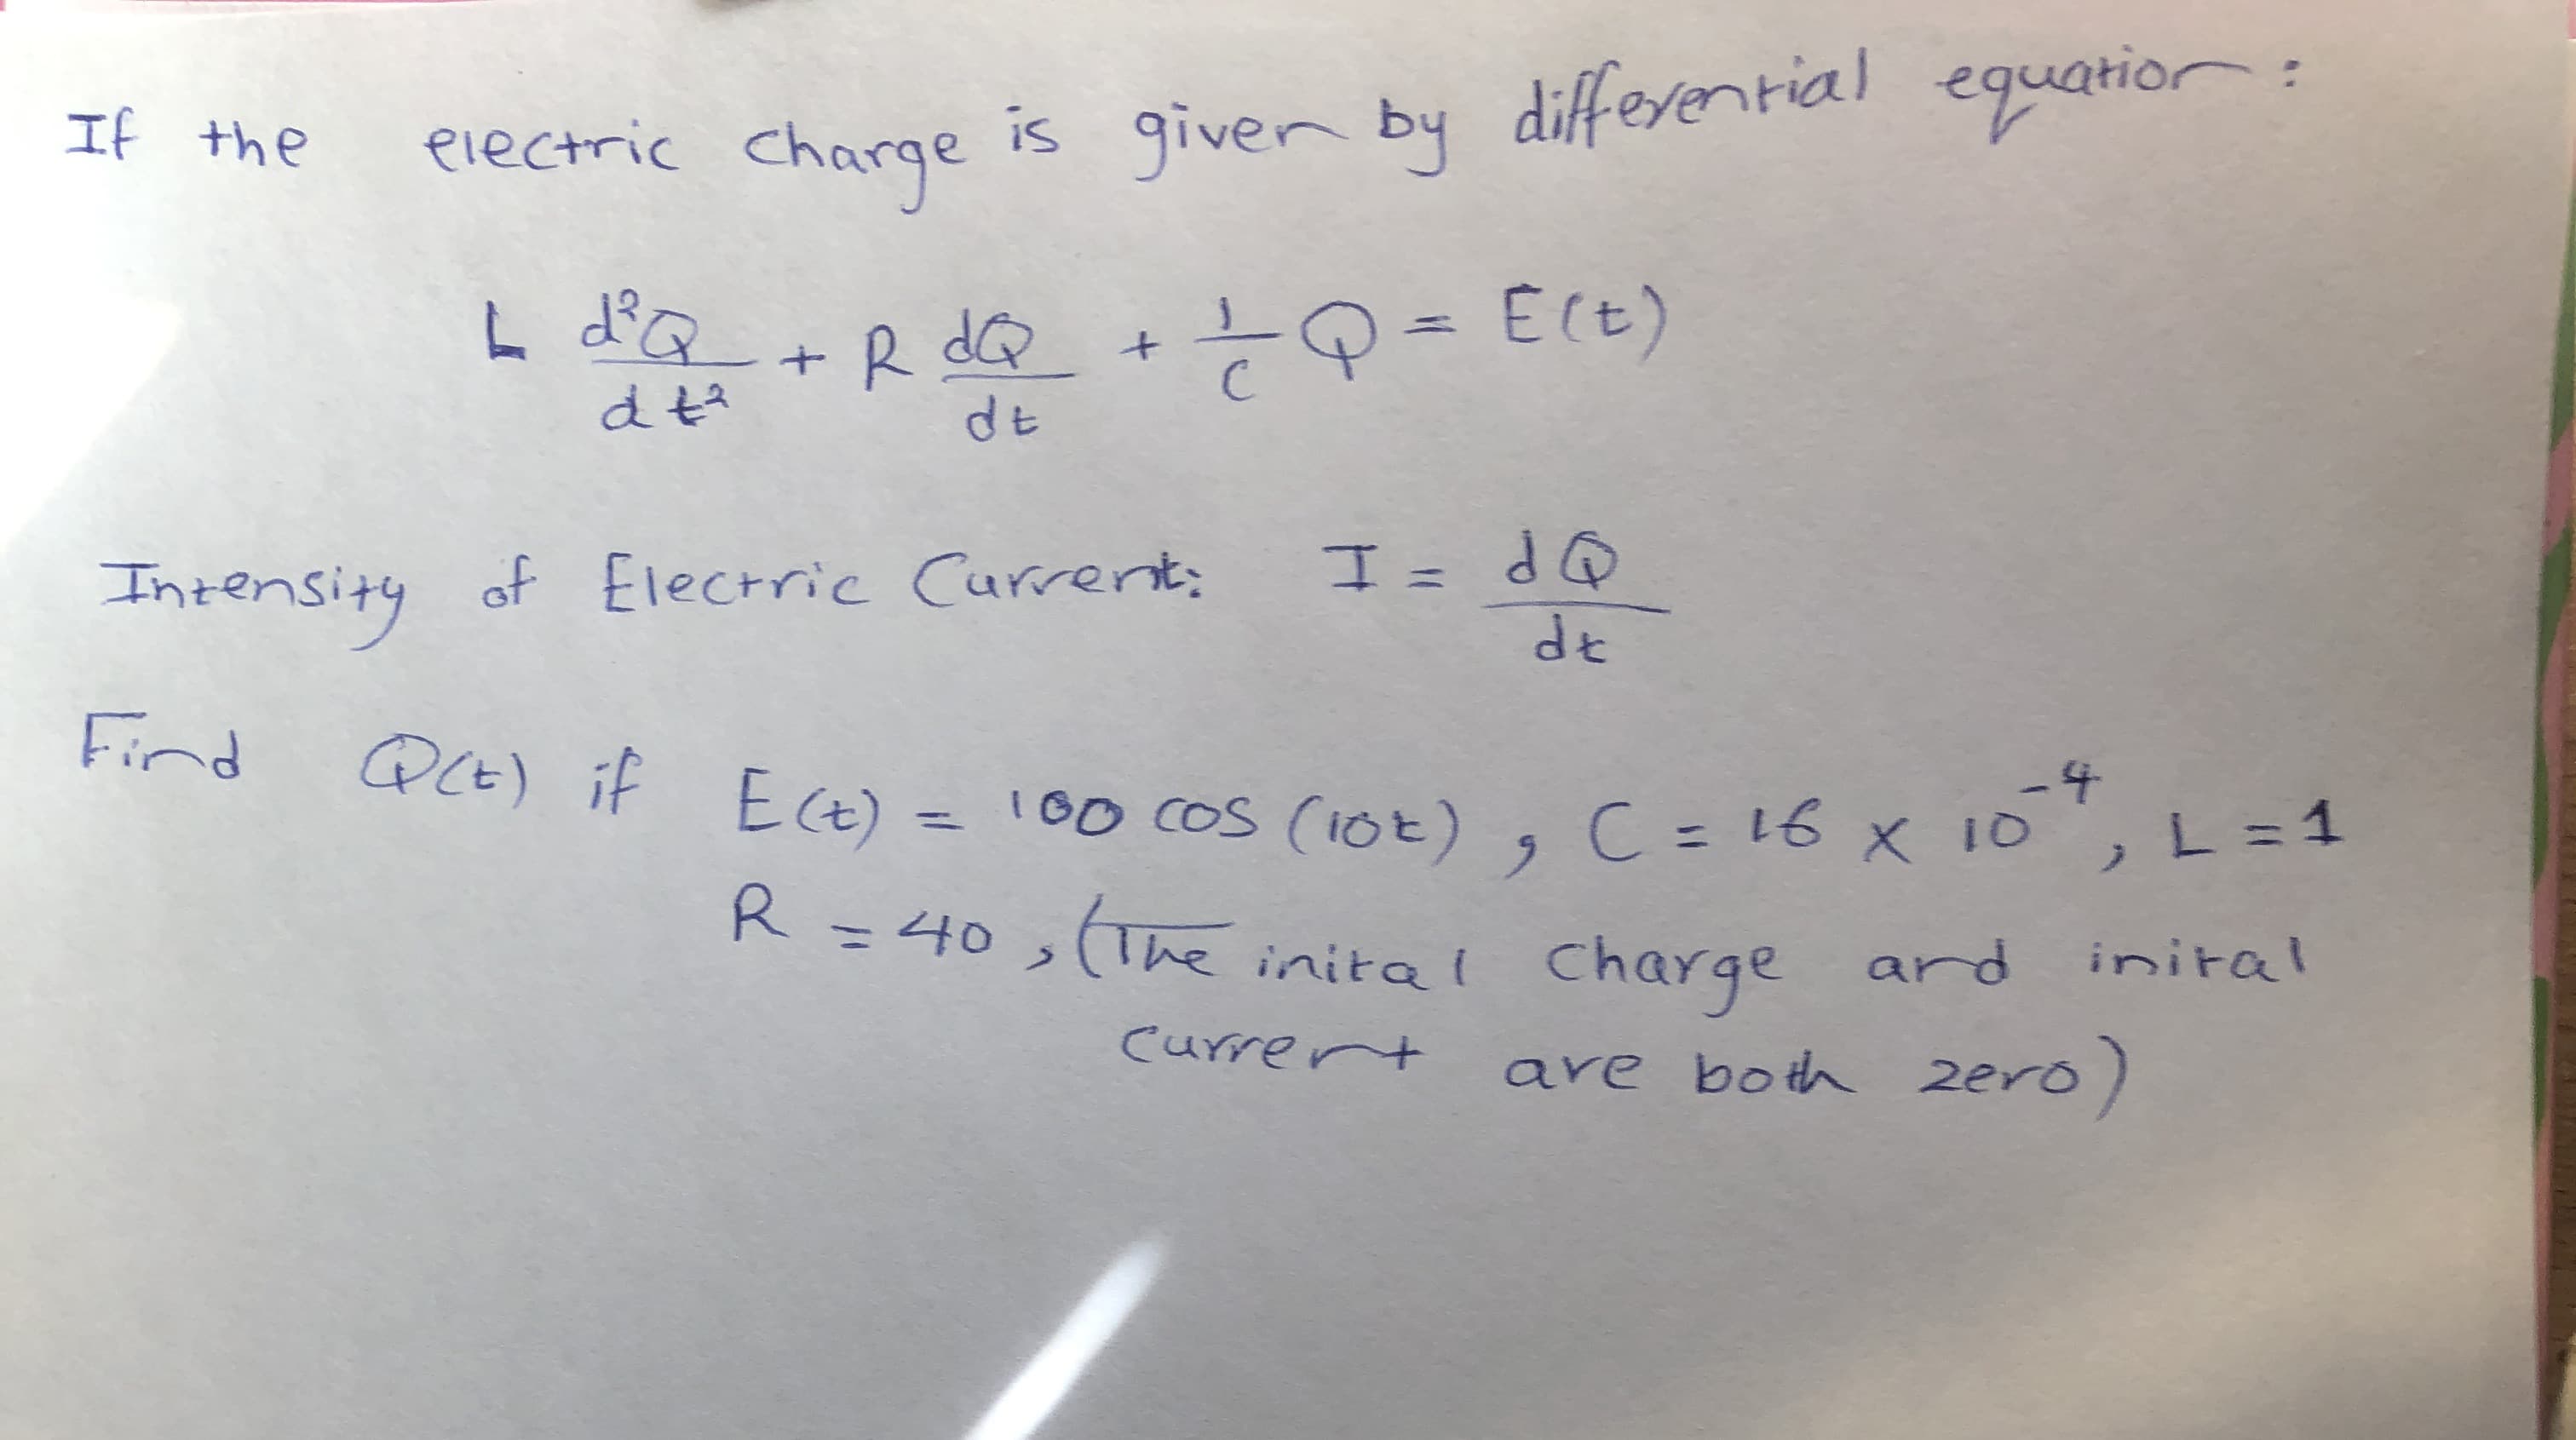 is giver by equatior
differential
If the
electric Charge
L dďQ +R dQ
dE
Intensity of Electric Current;
OP = エ
de
Find
PCE) if E(t) = 100 CoS (iOt), C = 16 x 10,L = 1
Ect) = 100 CoS (10t) , C = 16 x 10
L = 1
%3D
%3D
R
R=40,(The inital charge ard
inital
